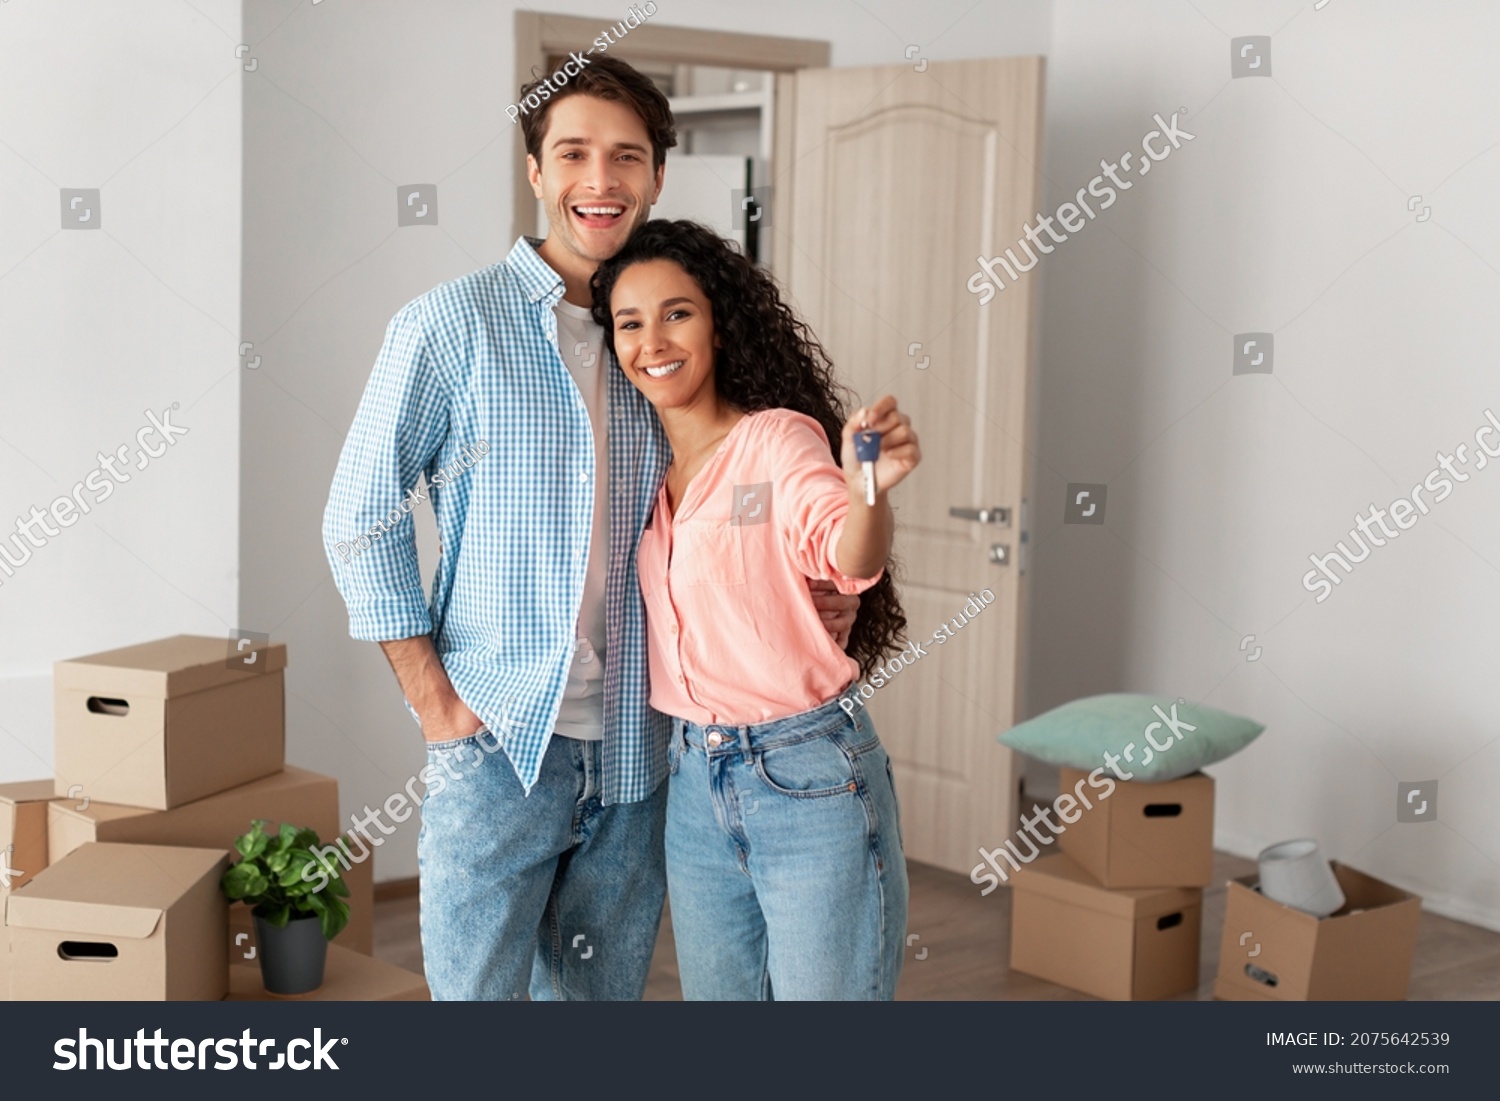 Mortgage and Relocation Concept. Portrait of happy woman hugging man, holding key from new first house, young family celebrating moving day, satisfied customers buyers couple purchase real estate #2075642539